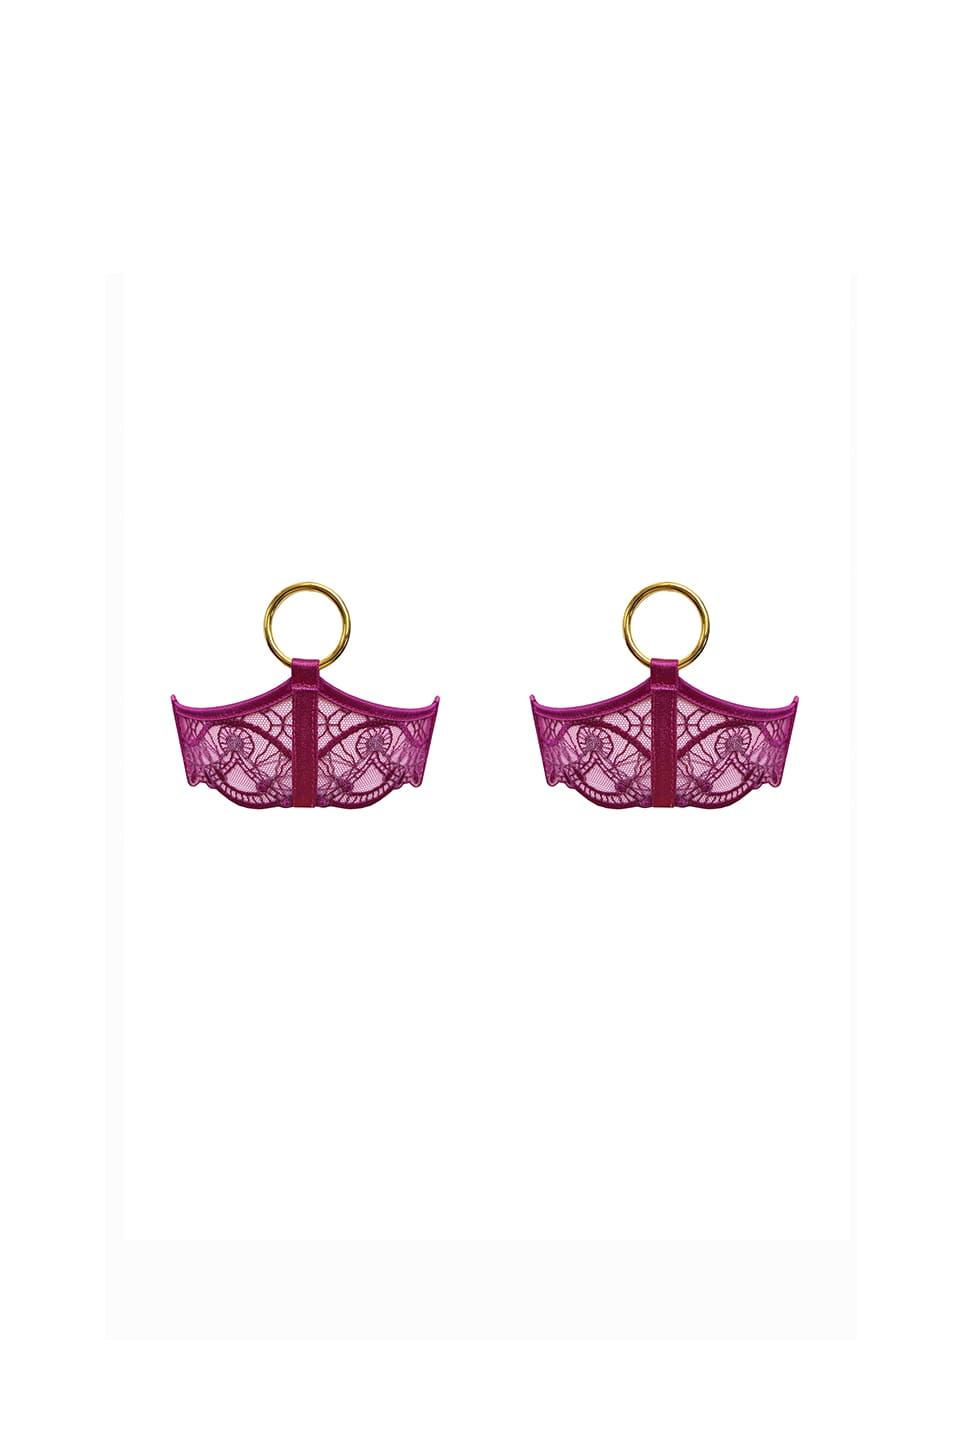 Shop online trendy Pink Lingerie accessories from Bordelle Fashion designer. Product gallery 1